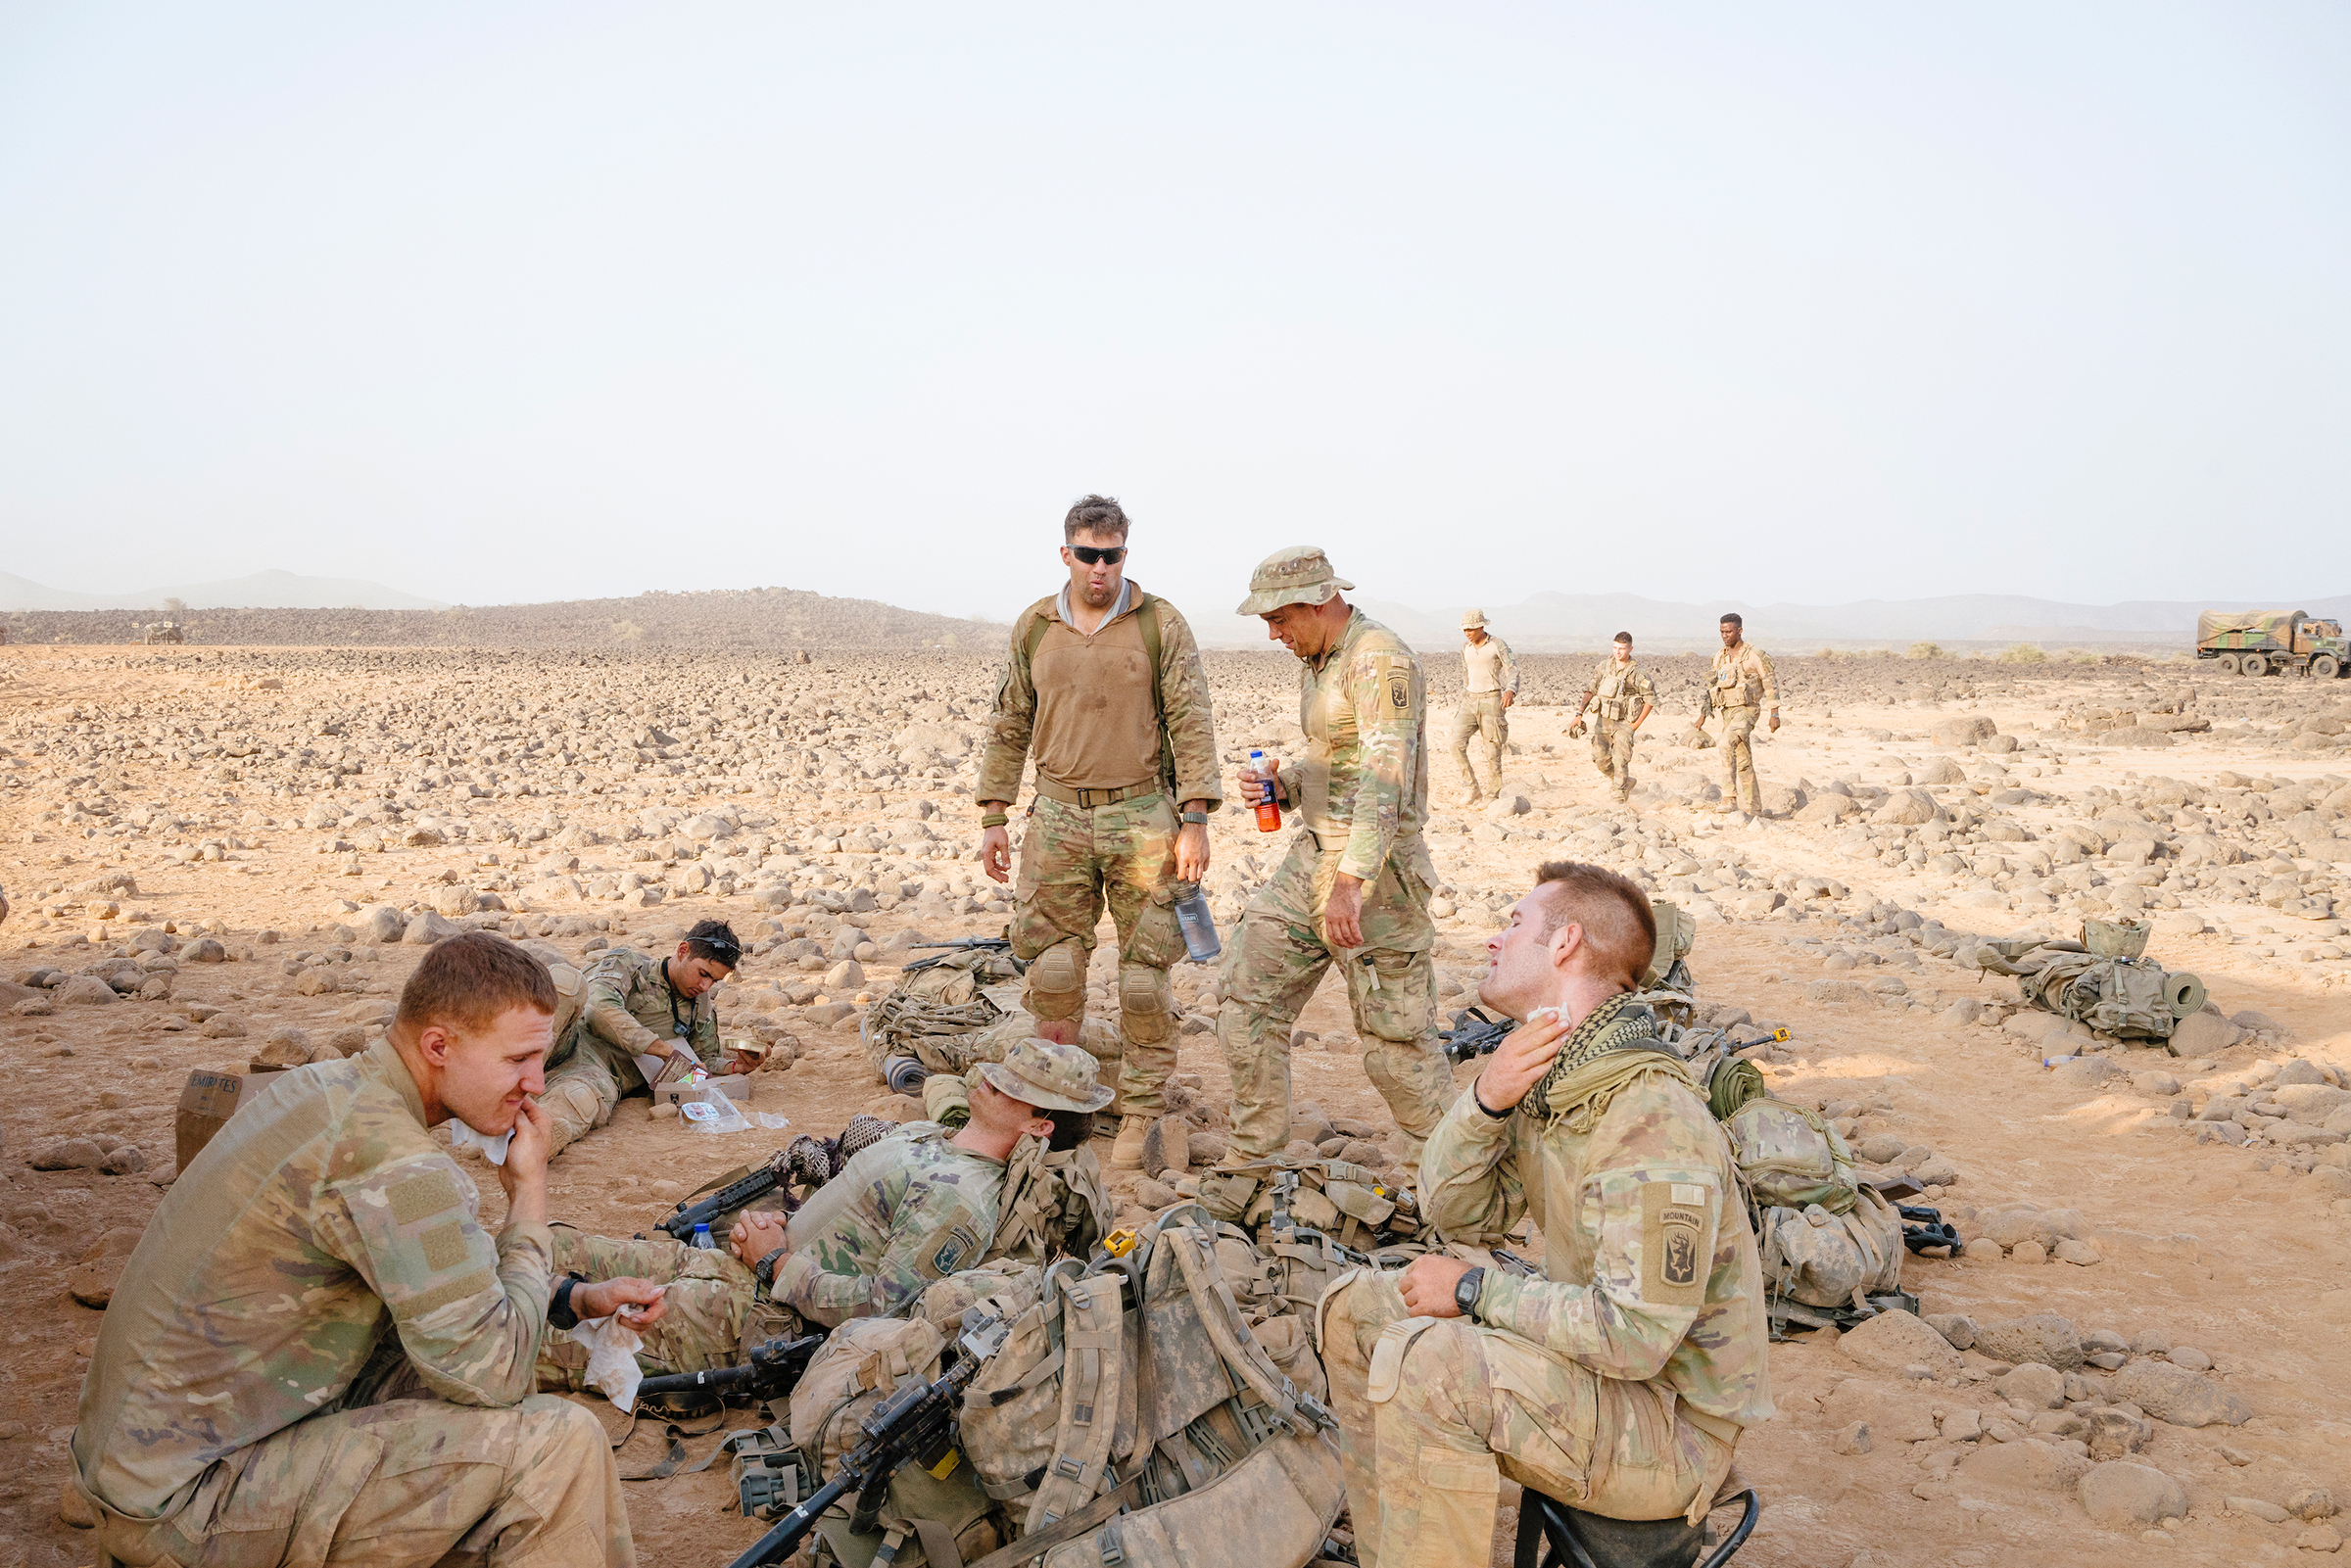 Soldiers take a break during desert training. (Emanuele Satolli for TIME)